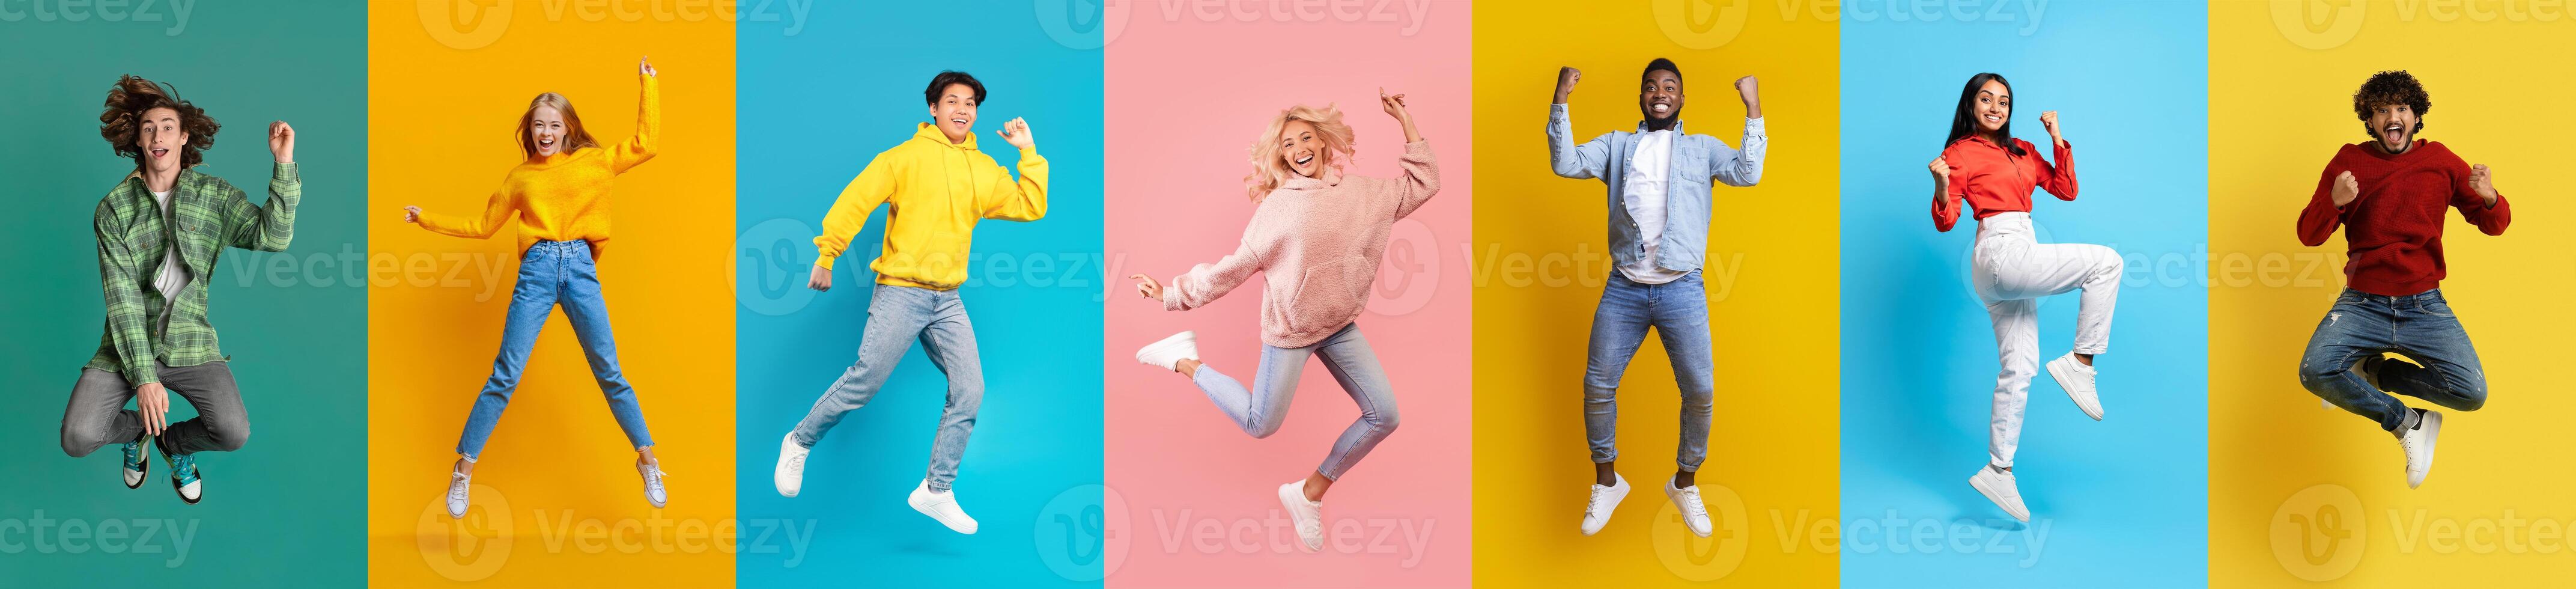 Group Of Happy Multiethnic People Celebrating Success And Jumping On Colorful Backgrounds photo